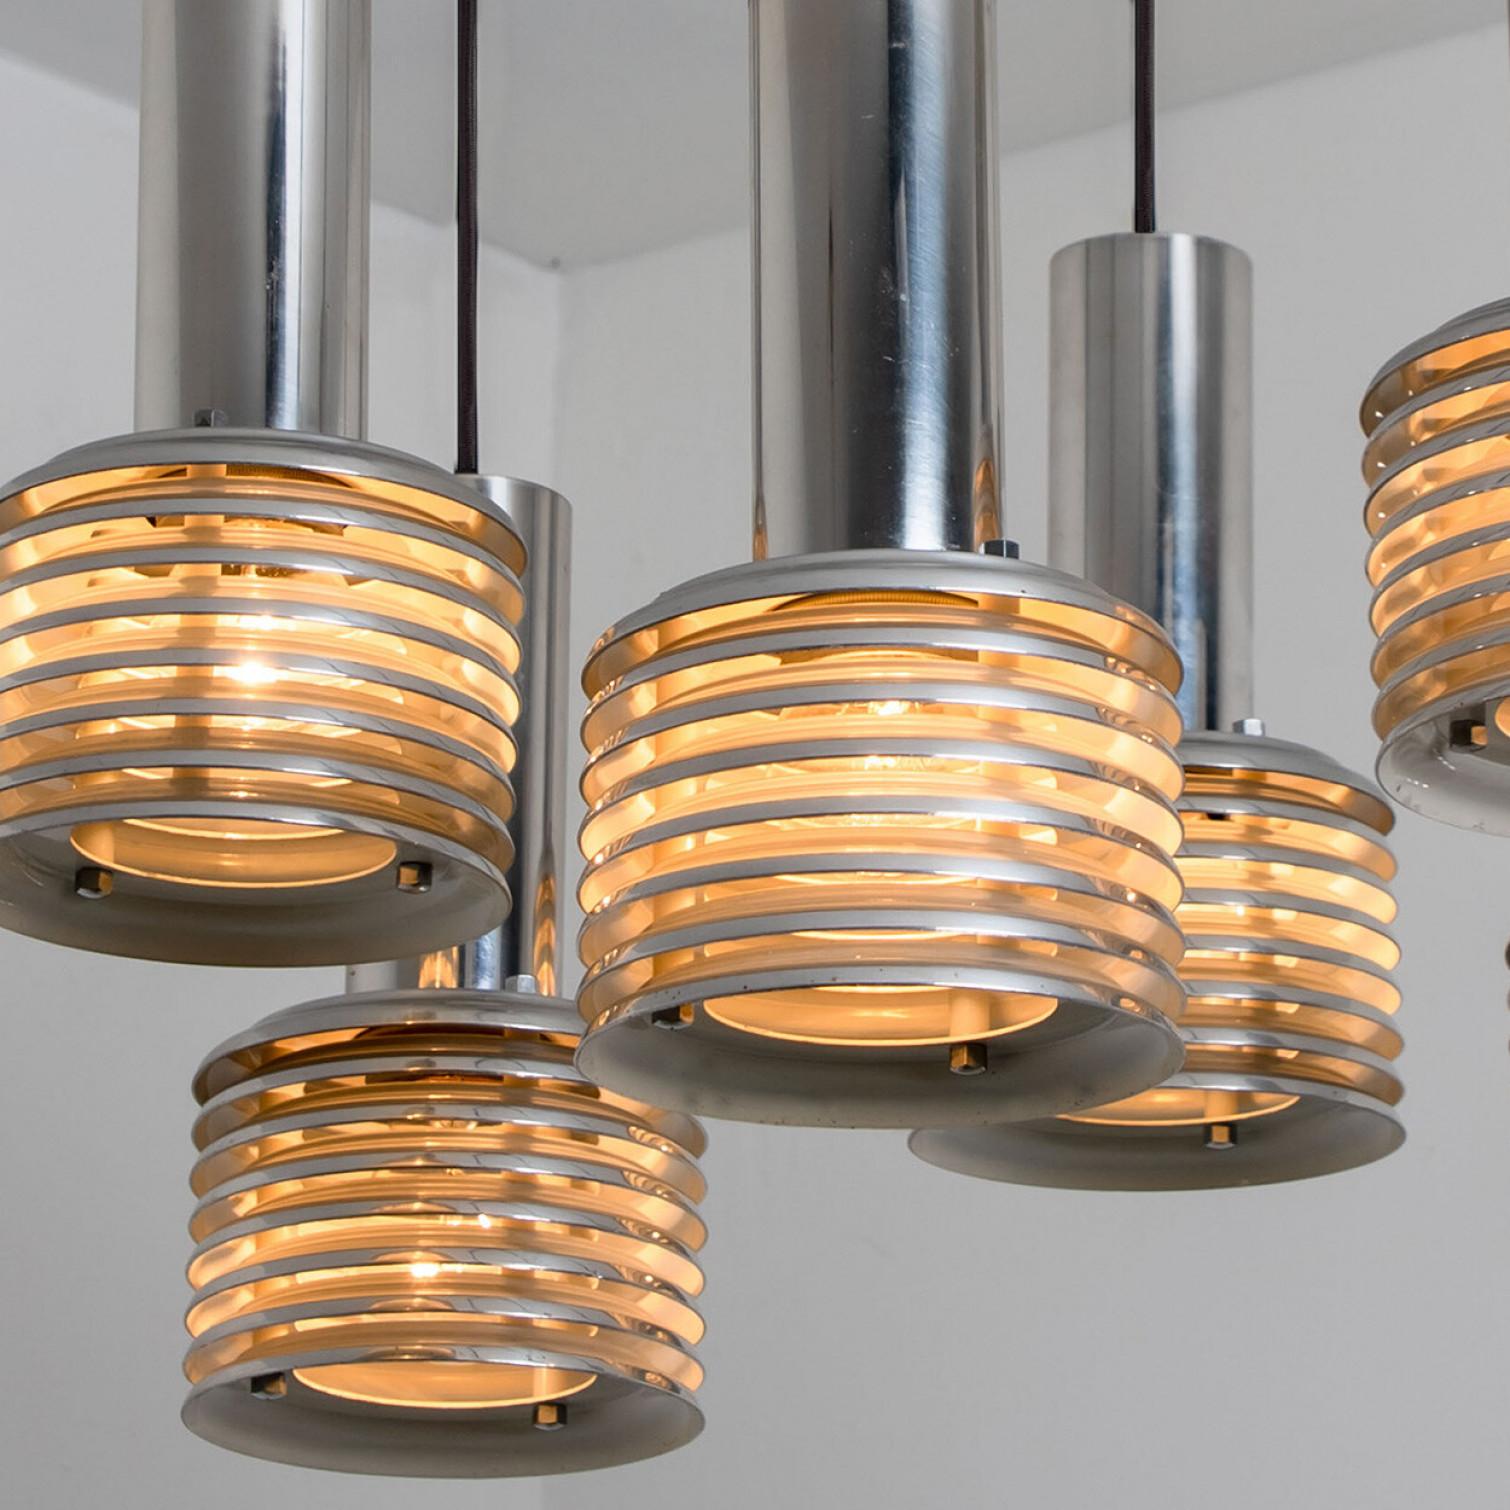 Late 20th Century 1 of the 6 Metal and Chrome Pendant Lights by Staff Leuchten, 1970s For Sale